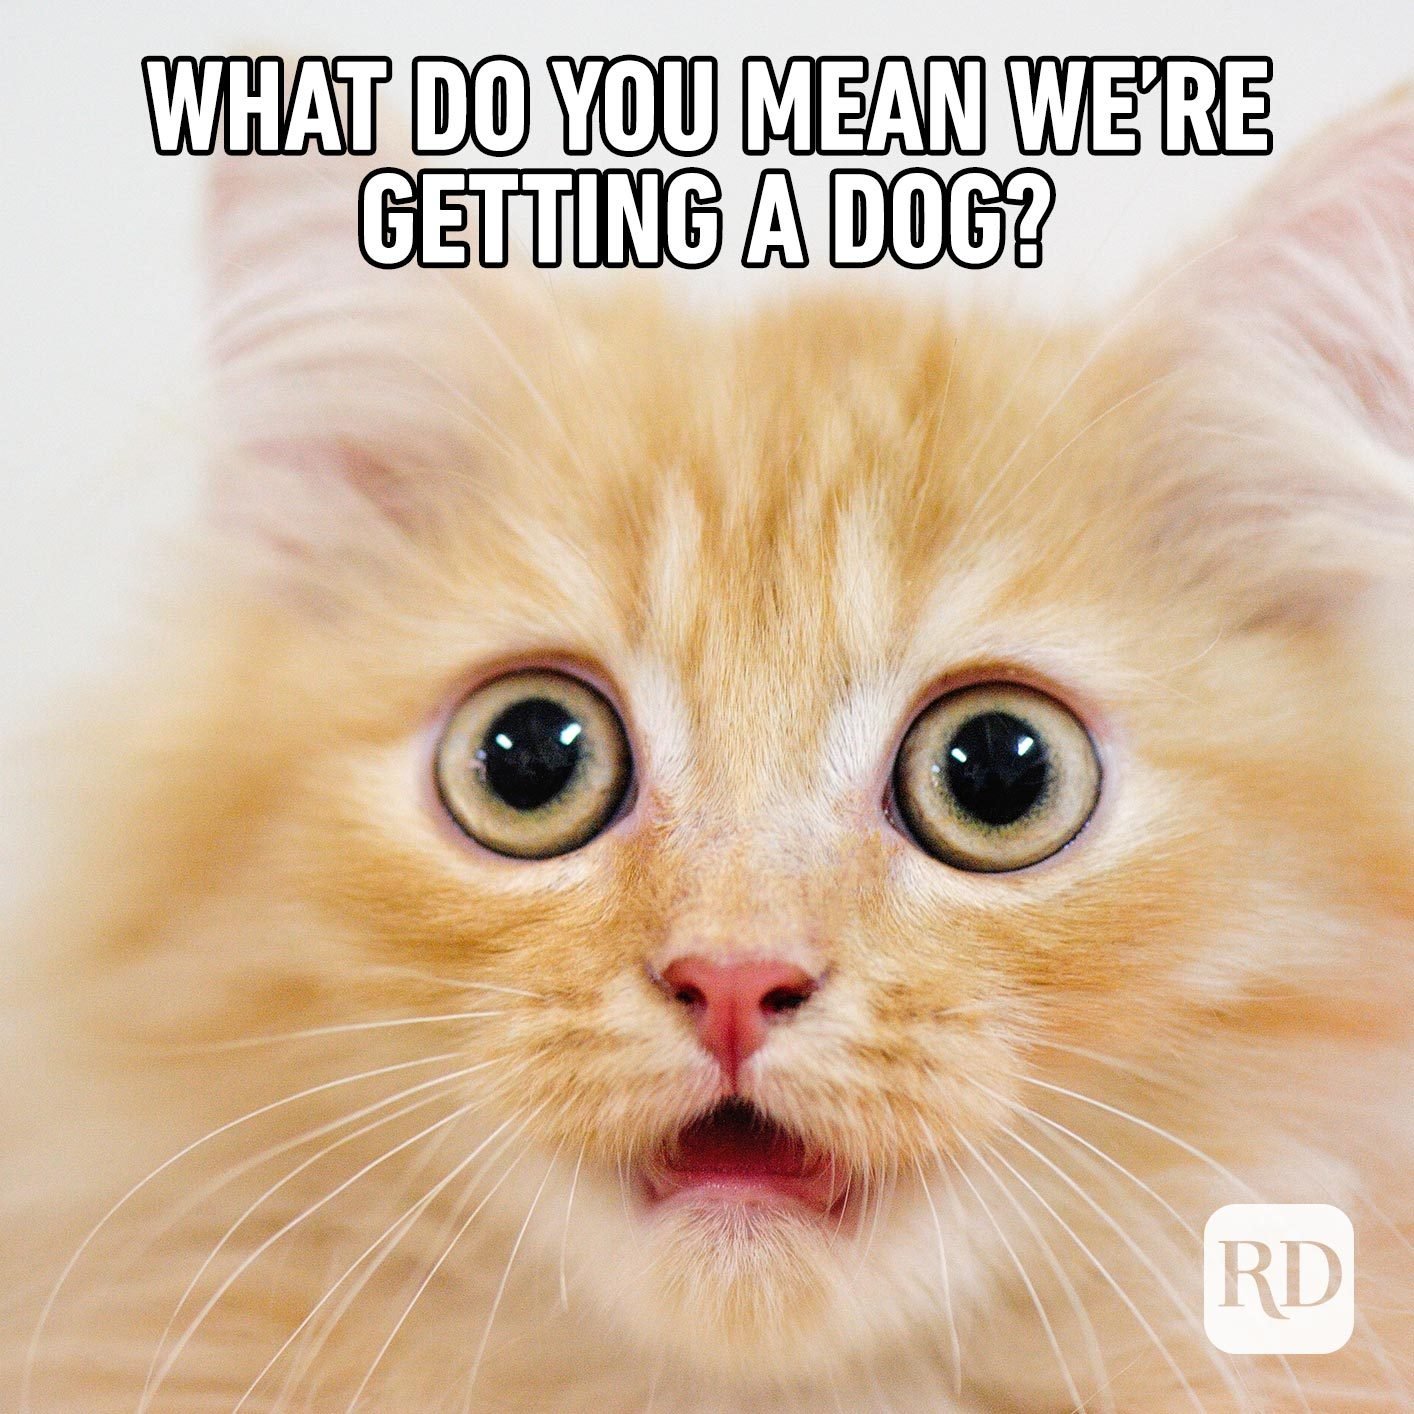 Terrified cat. Meme text: What do you mean we're getting a dog?